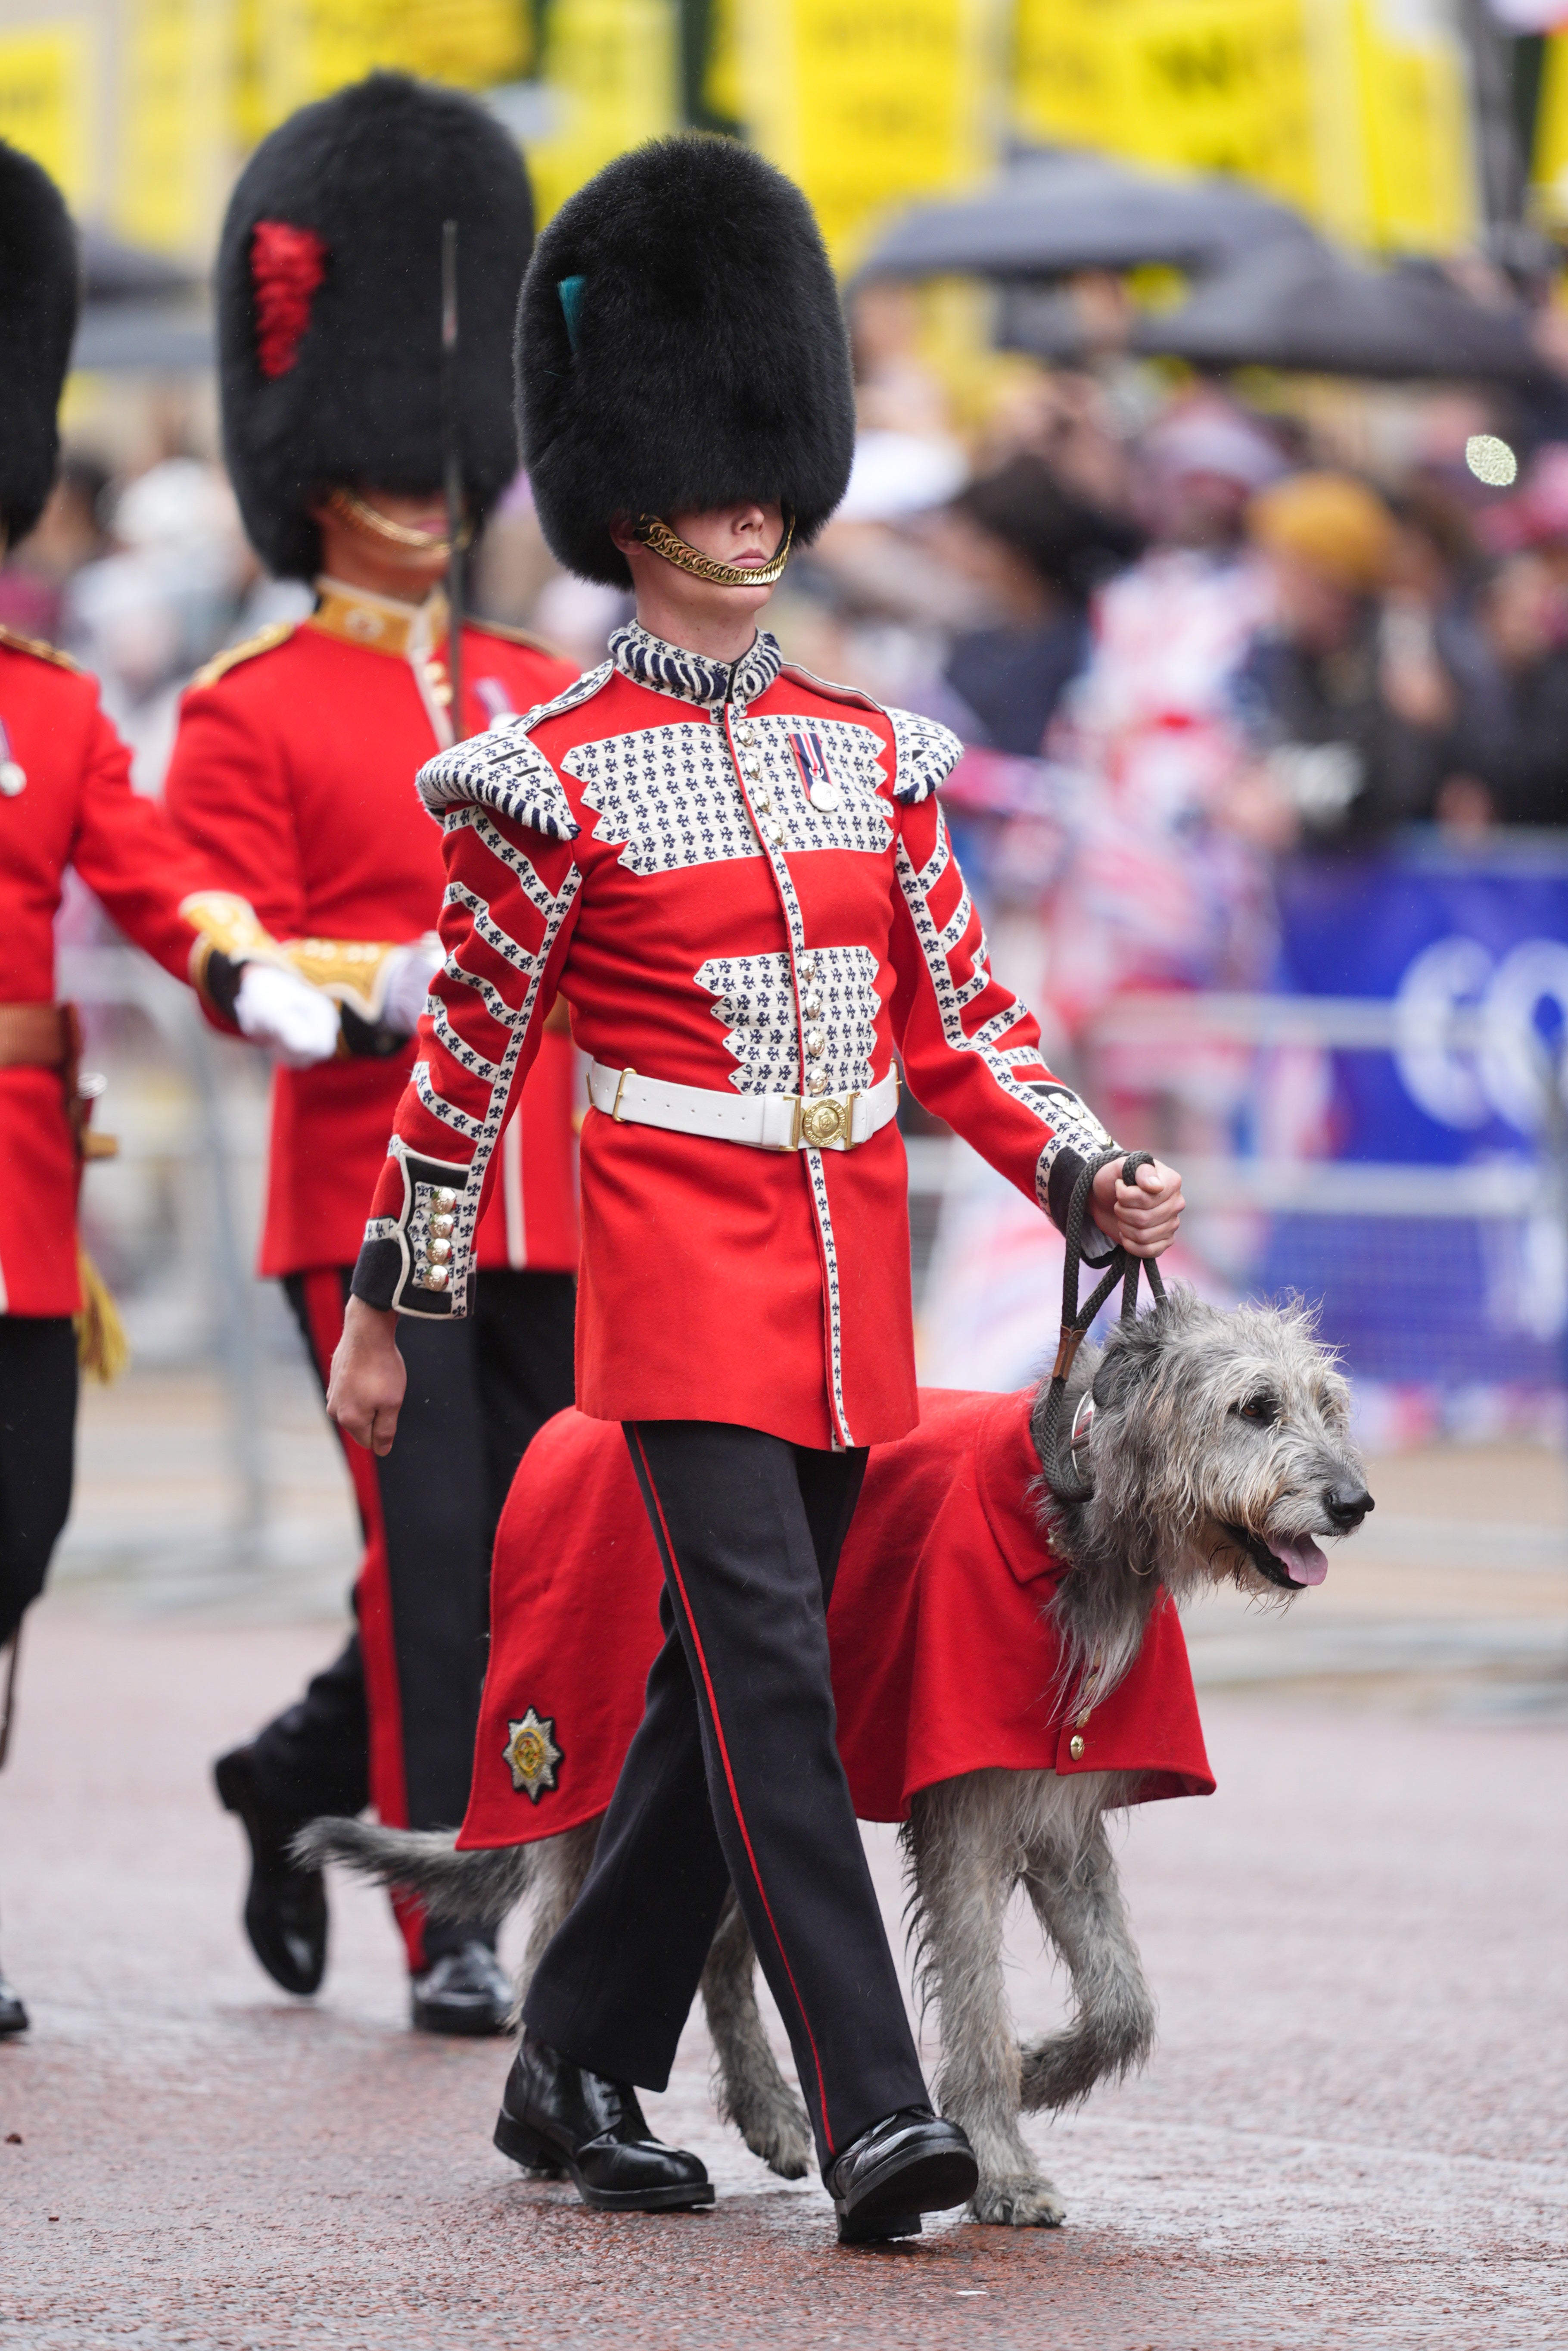 The official mascot of the Irish Guards, Seamus the wolfhound has been the mascot of the event for three years.